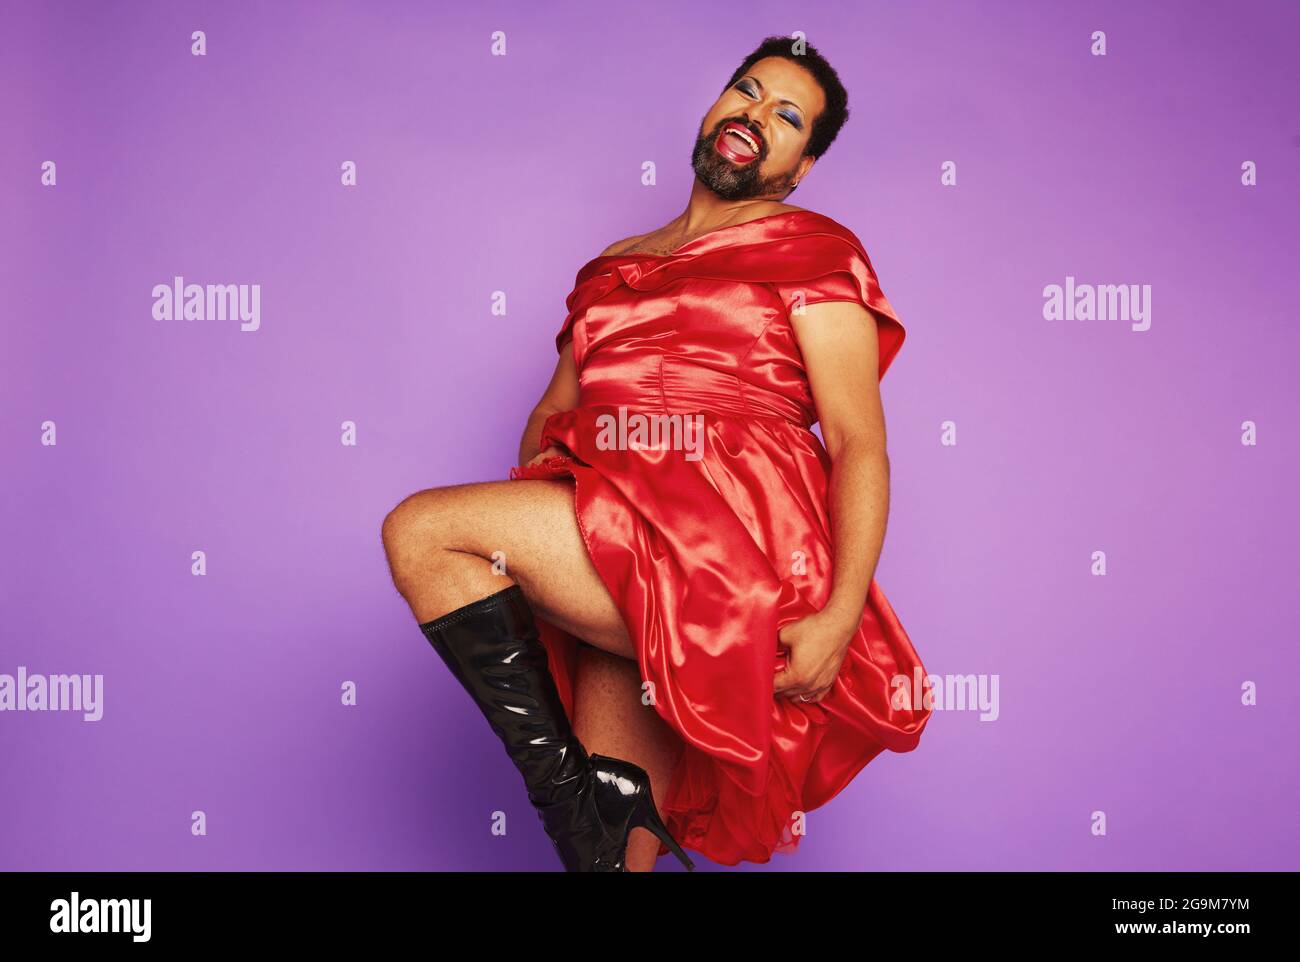 Full length of gay man wearing women clothing dancing and performing in studio. Androgynous male wearing red shiny dress. Stock Photo